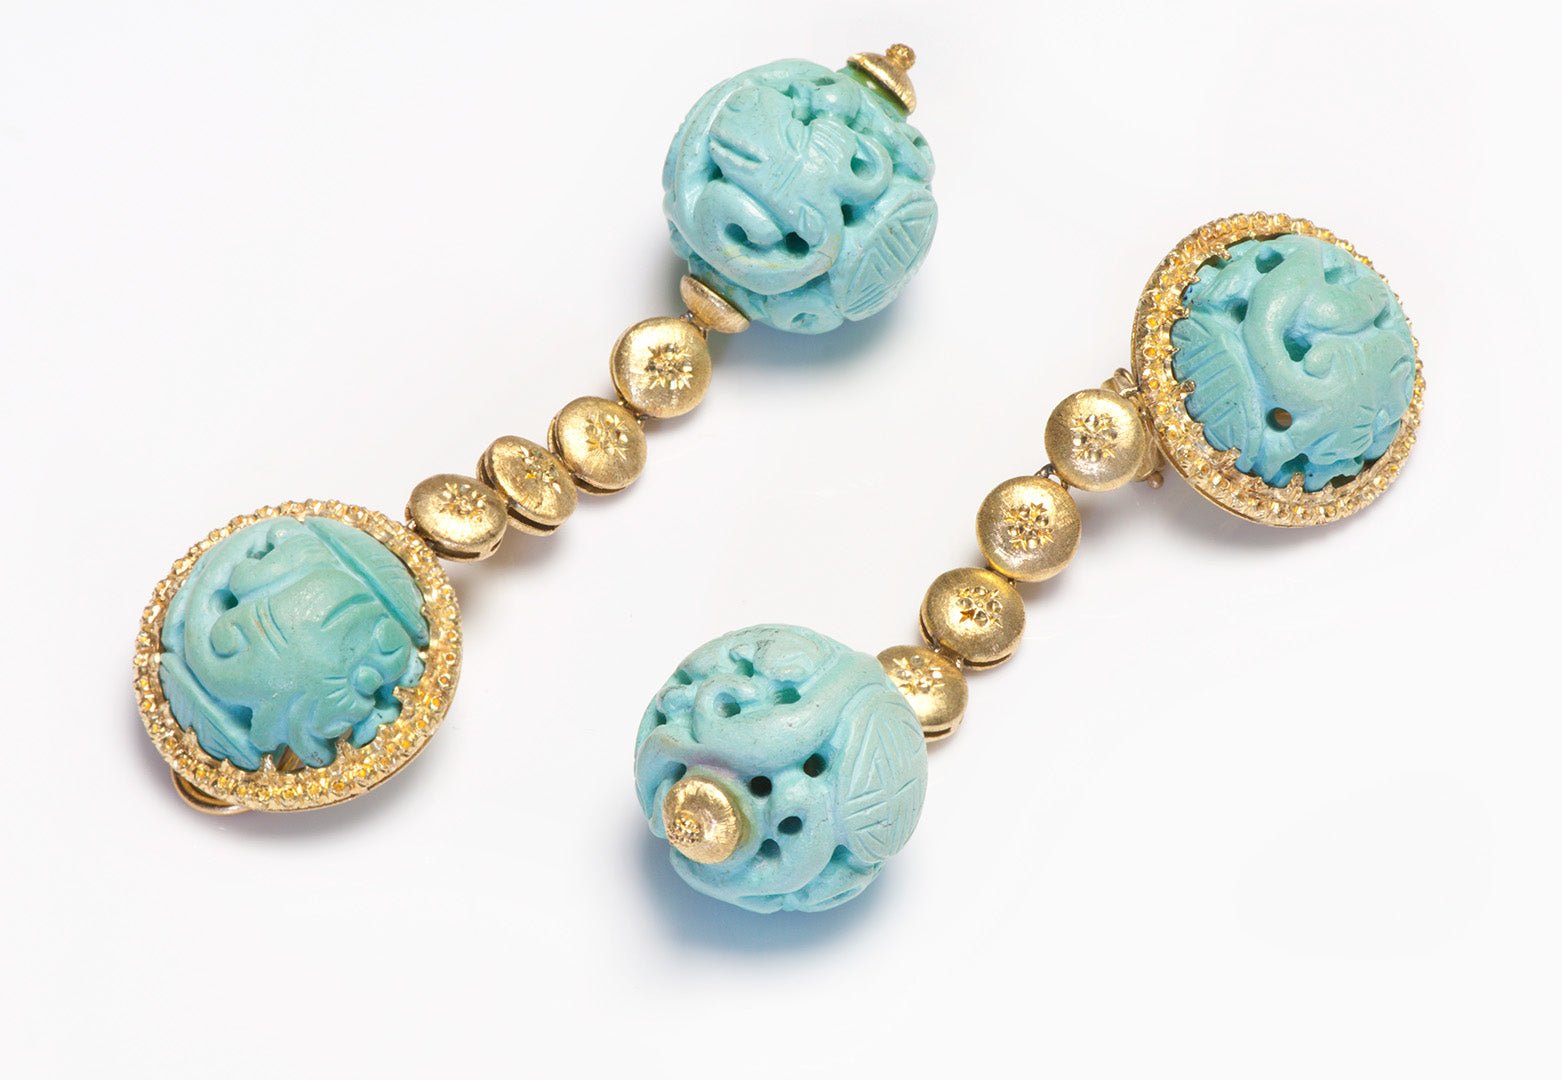 Buccellati 18K Gold Carved Turquoise Earrings - DSF Antique Jewelry